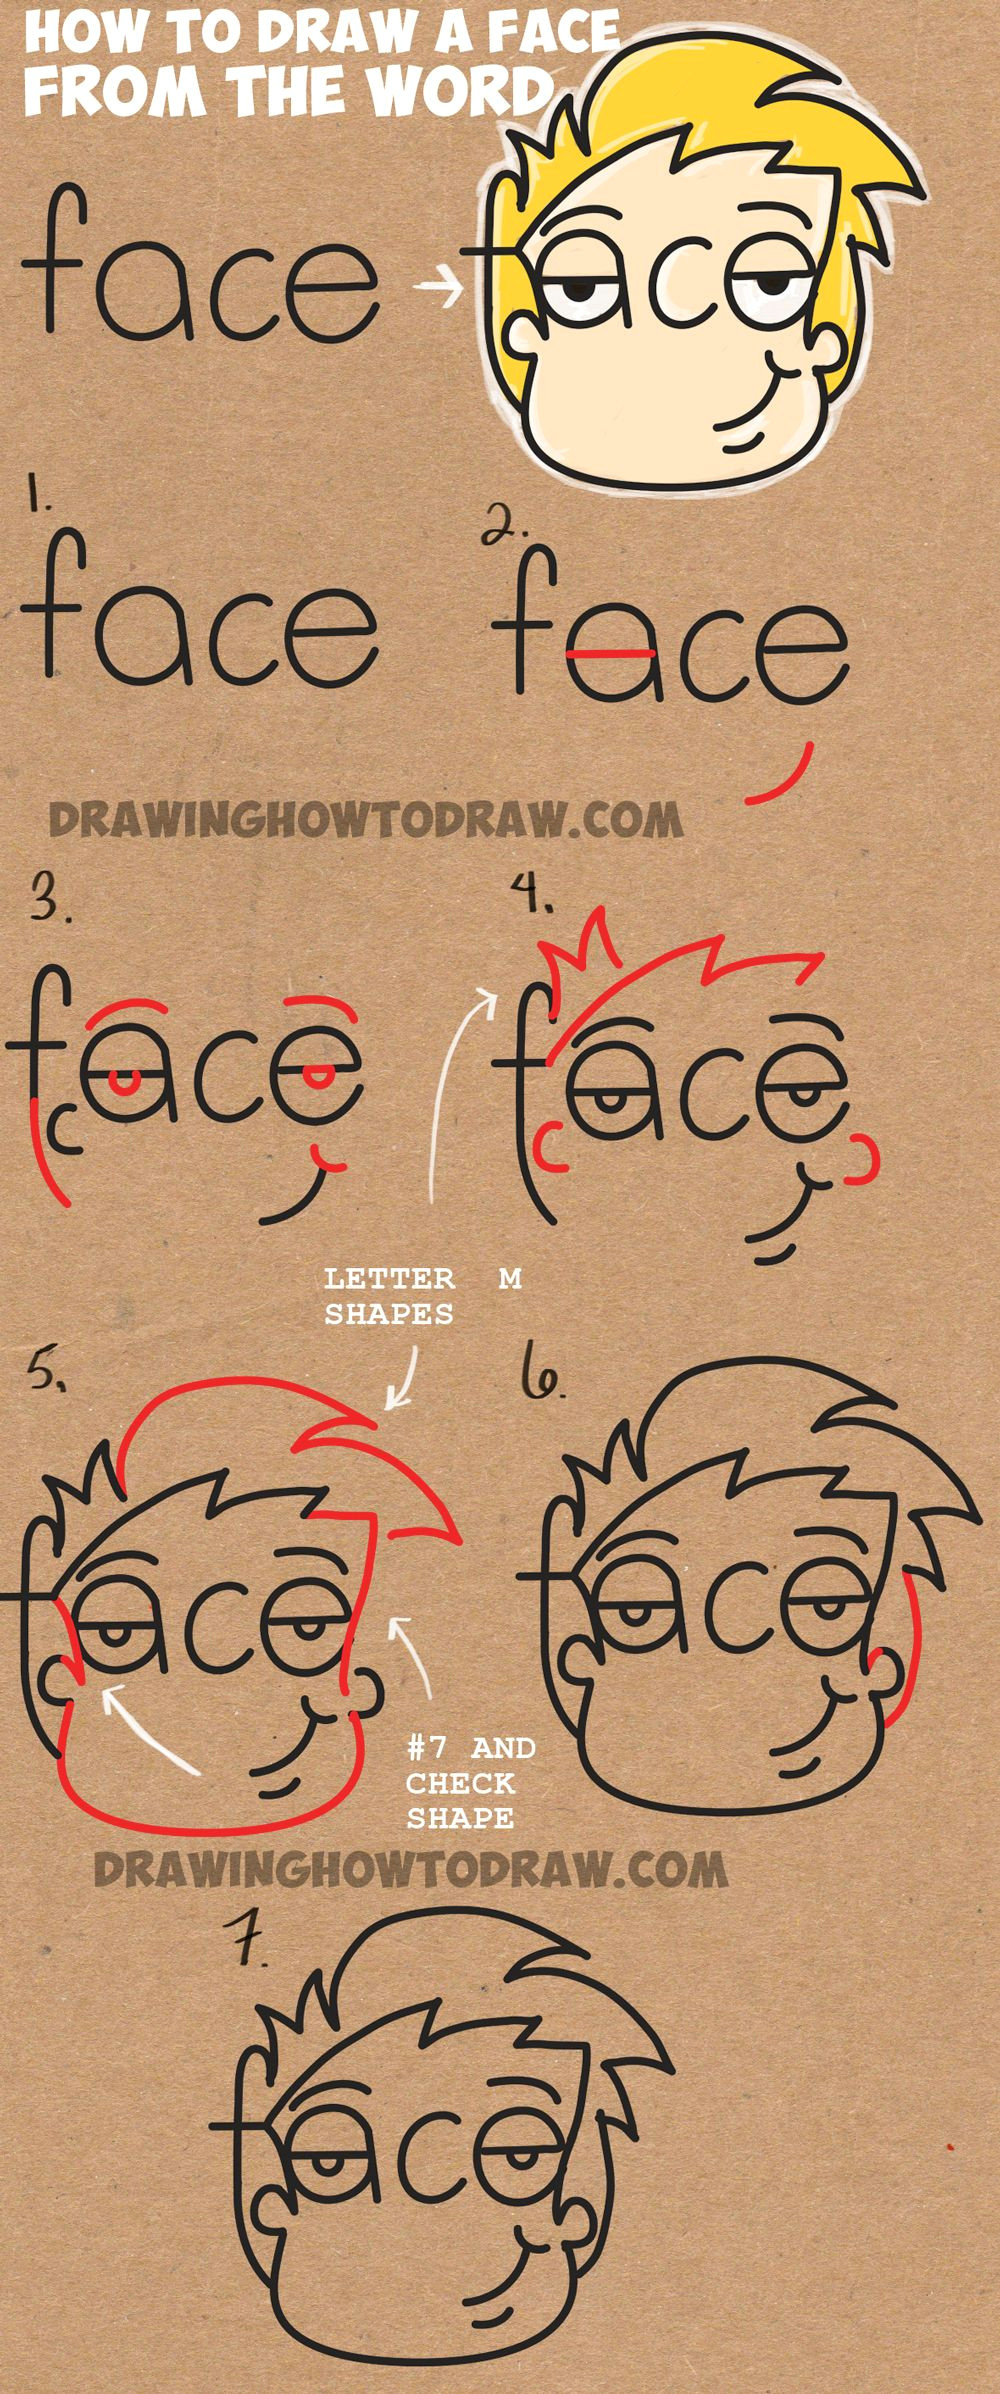 Drawing Ideas Using Letters How to Draw Cartoon Faces From the Word Face Easy Step by Step